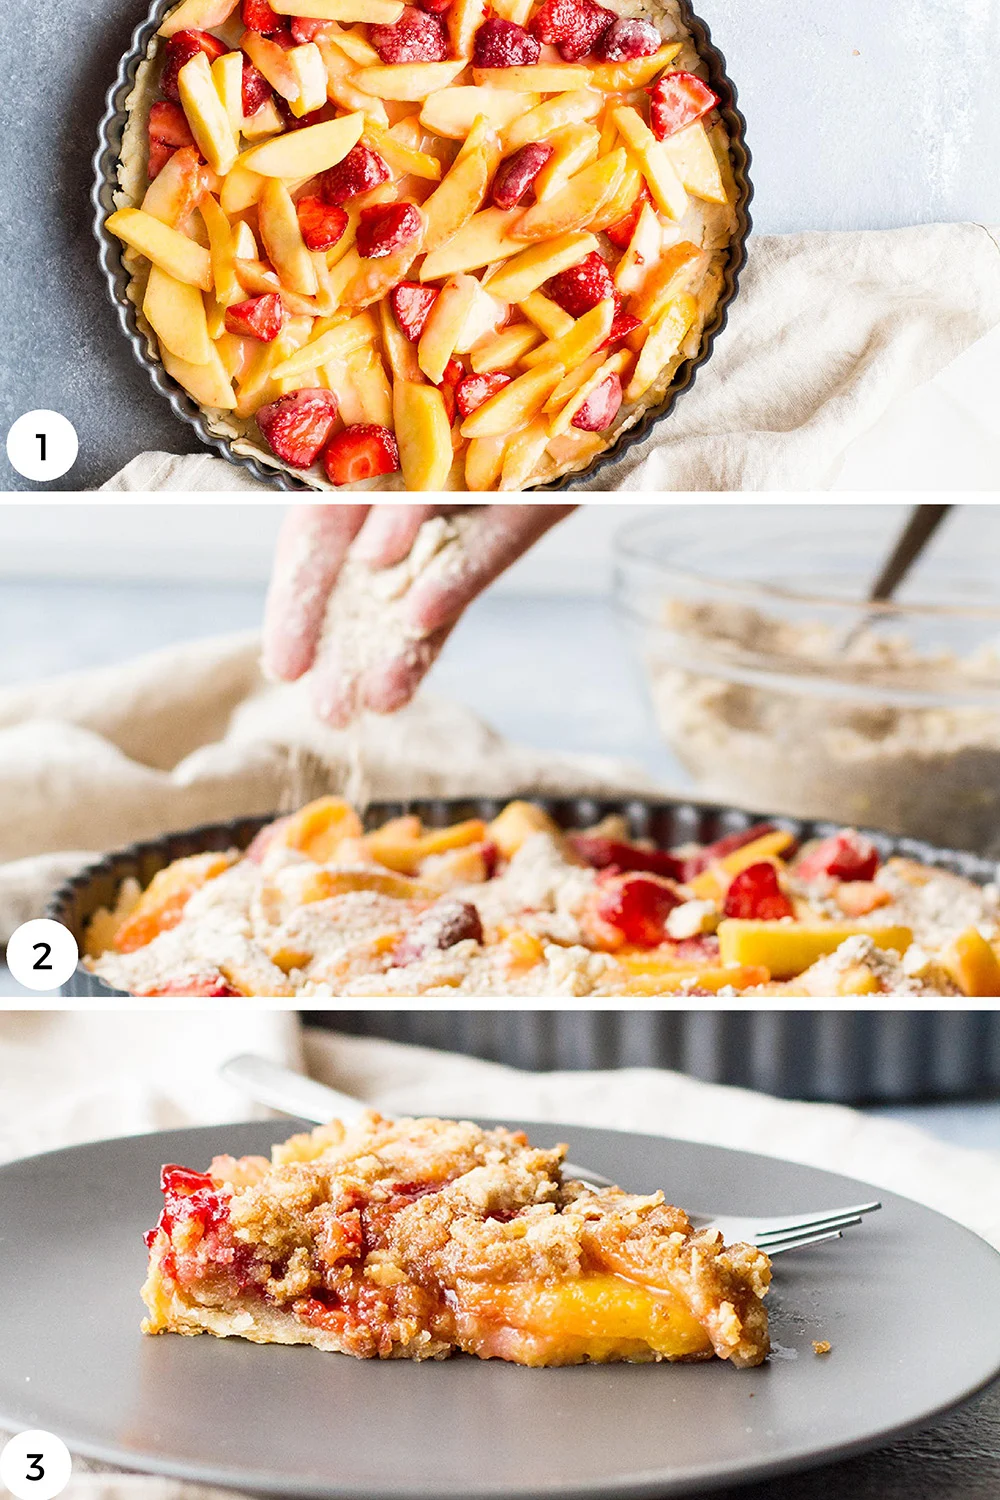 Steps to make peach pie with crumble top.